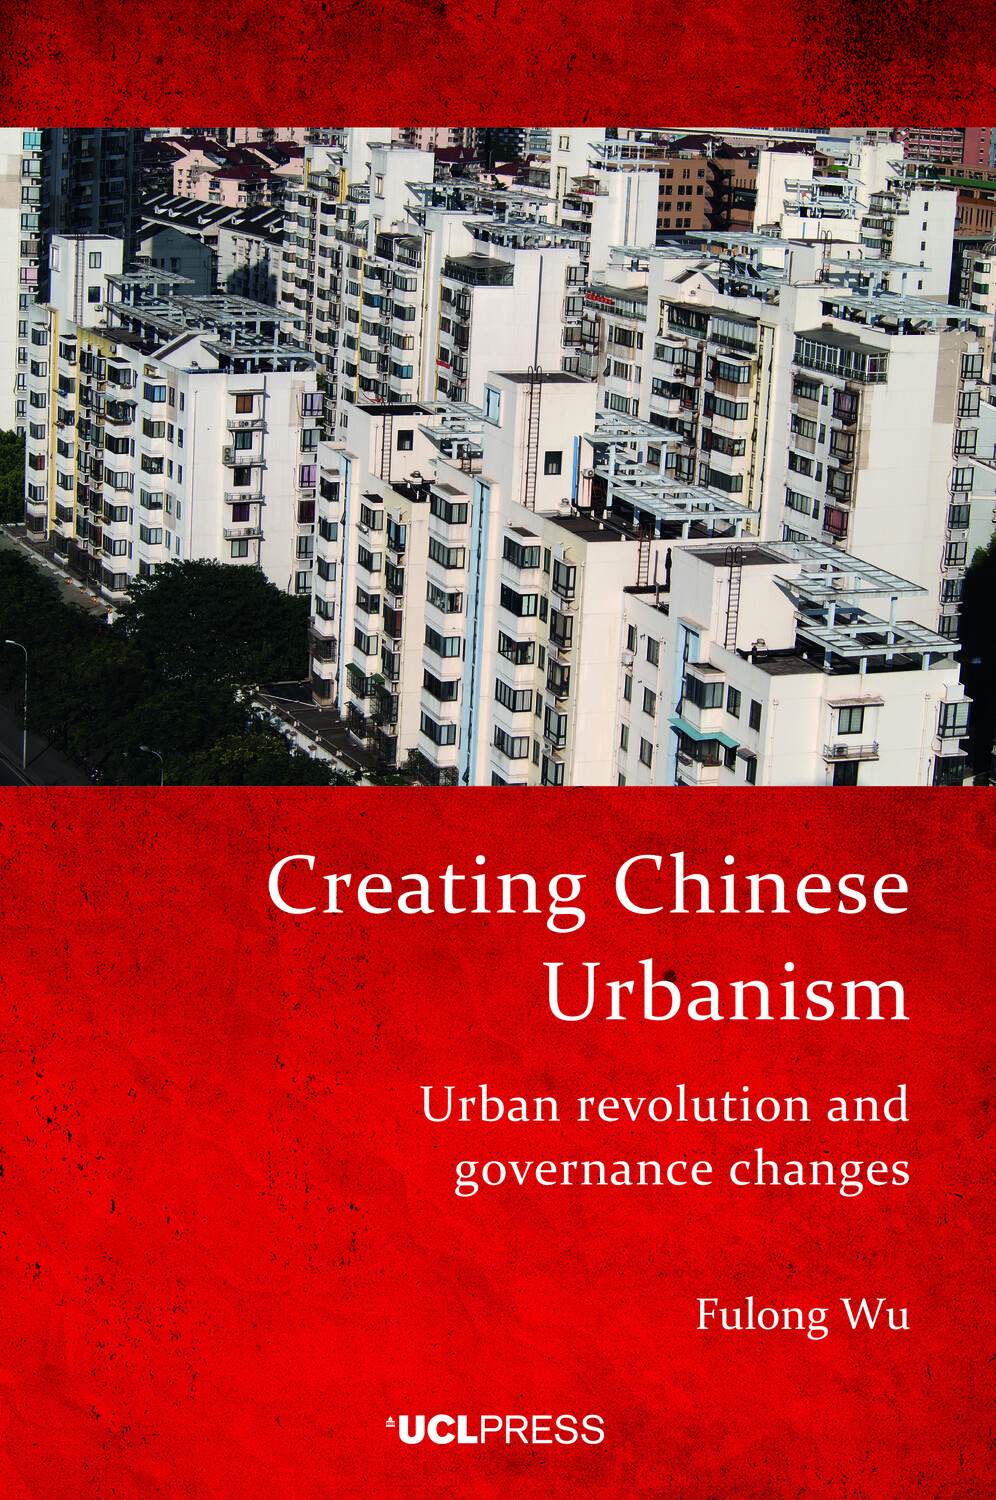 Creating Chinese Urbanism book cover